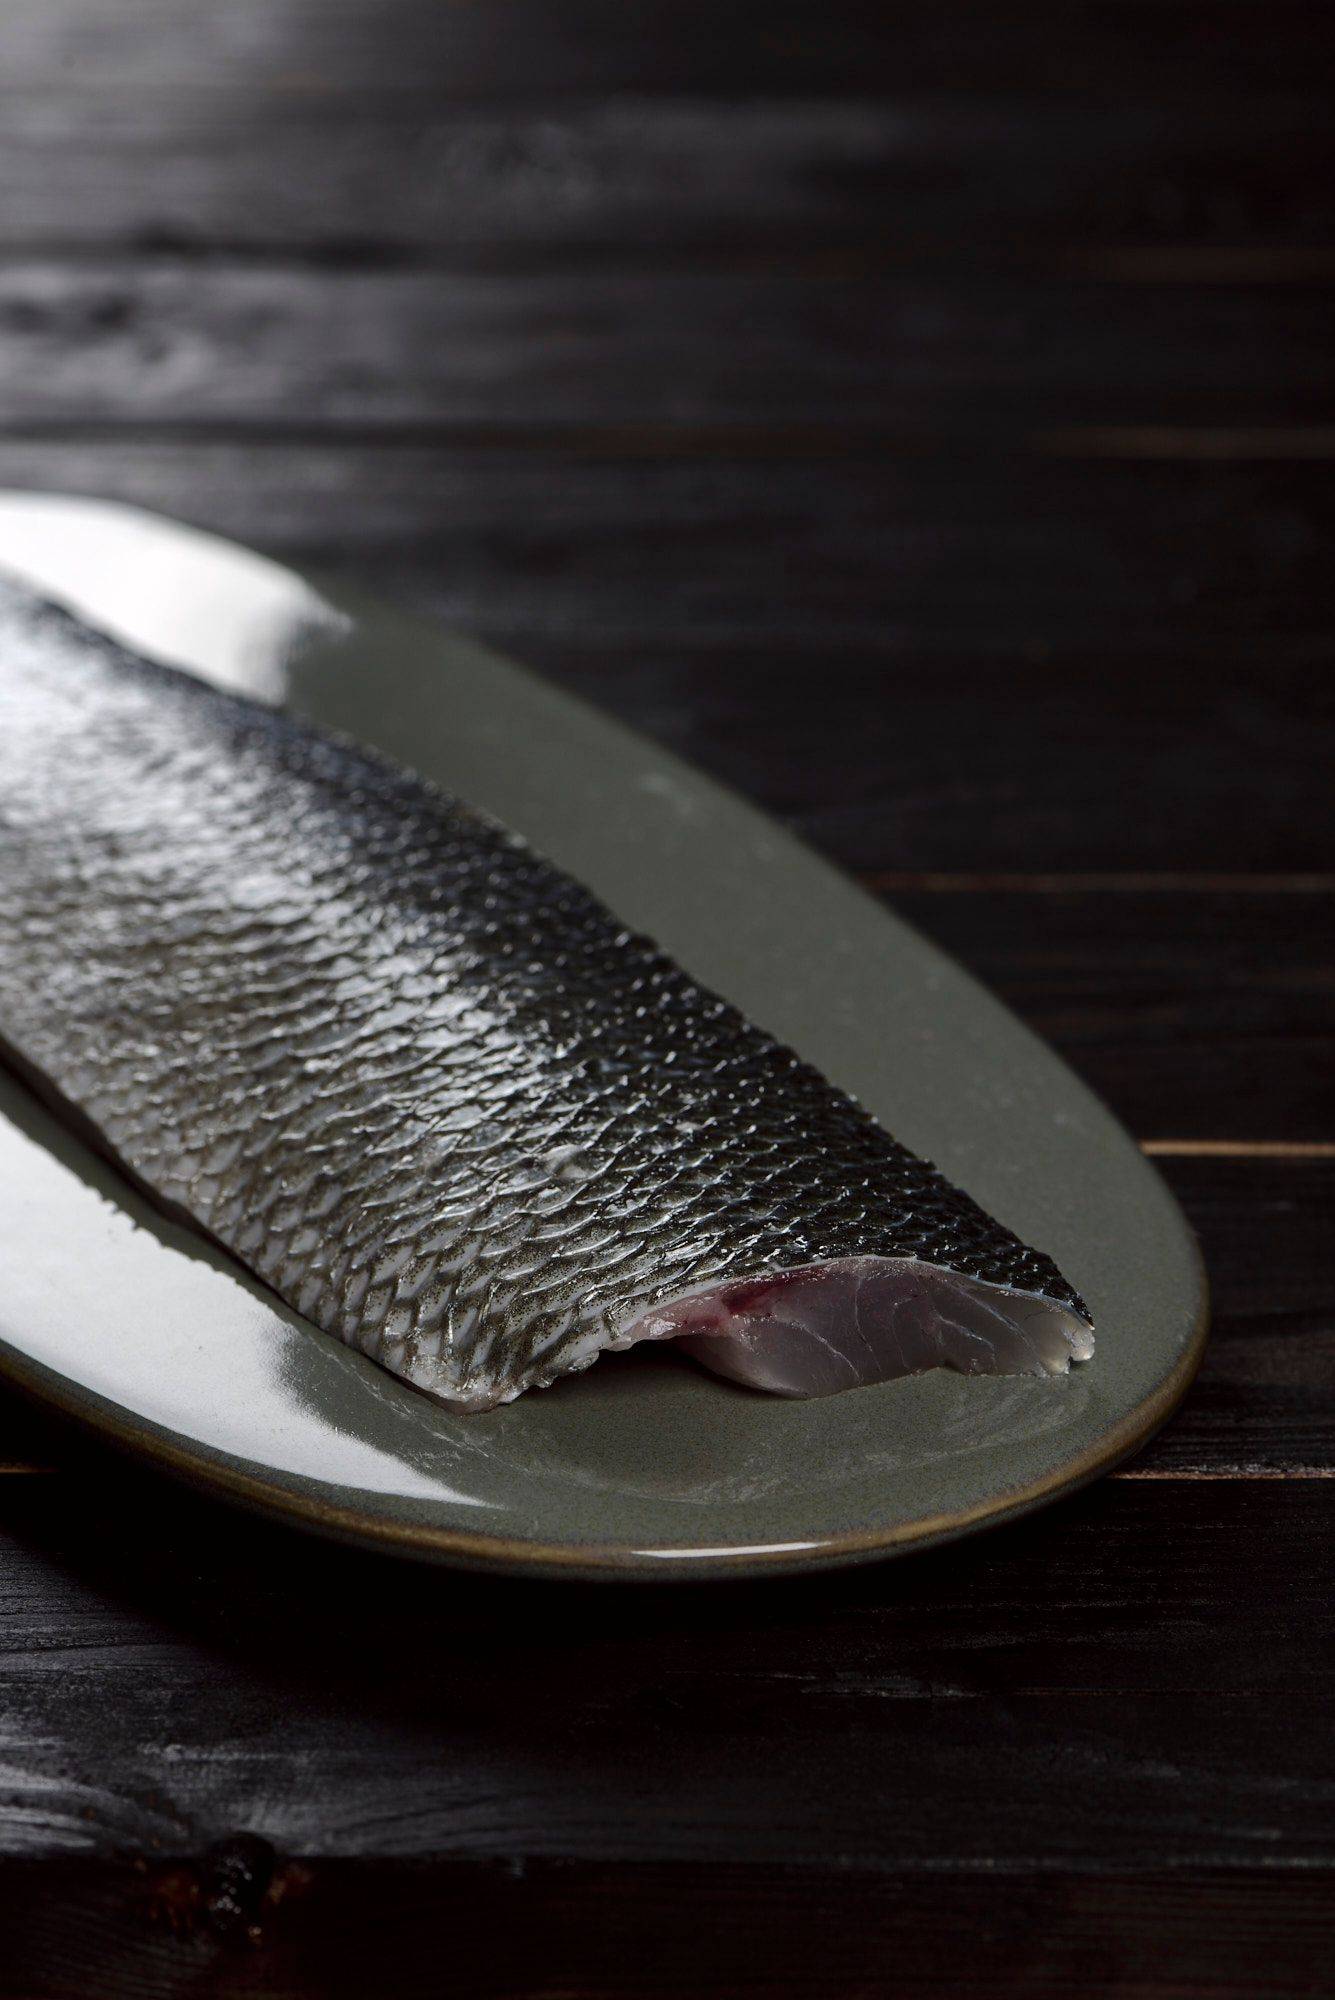 sea bass fillet on a gray plate with black wooden background